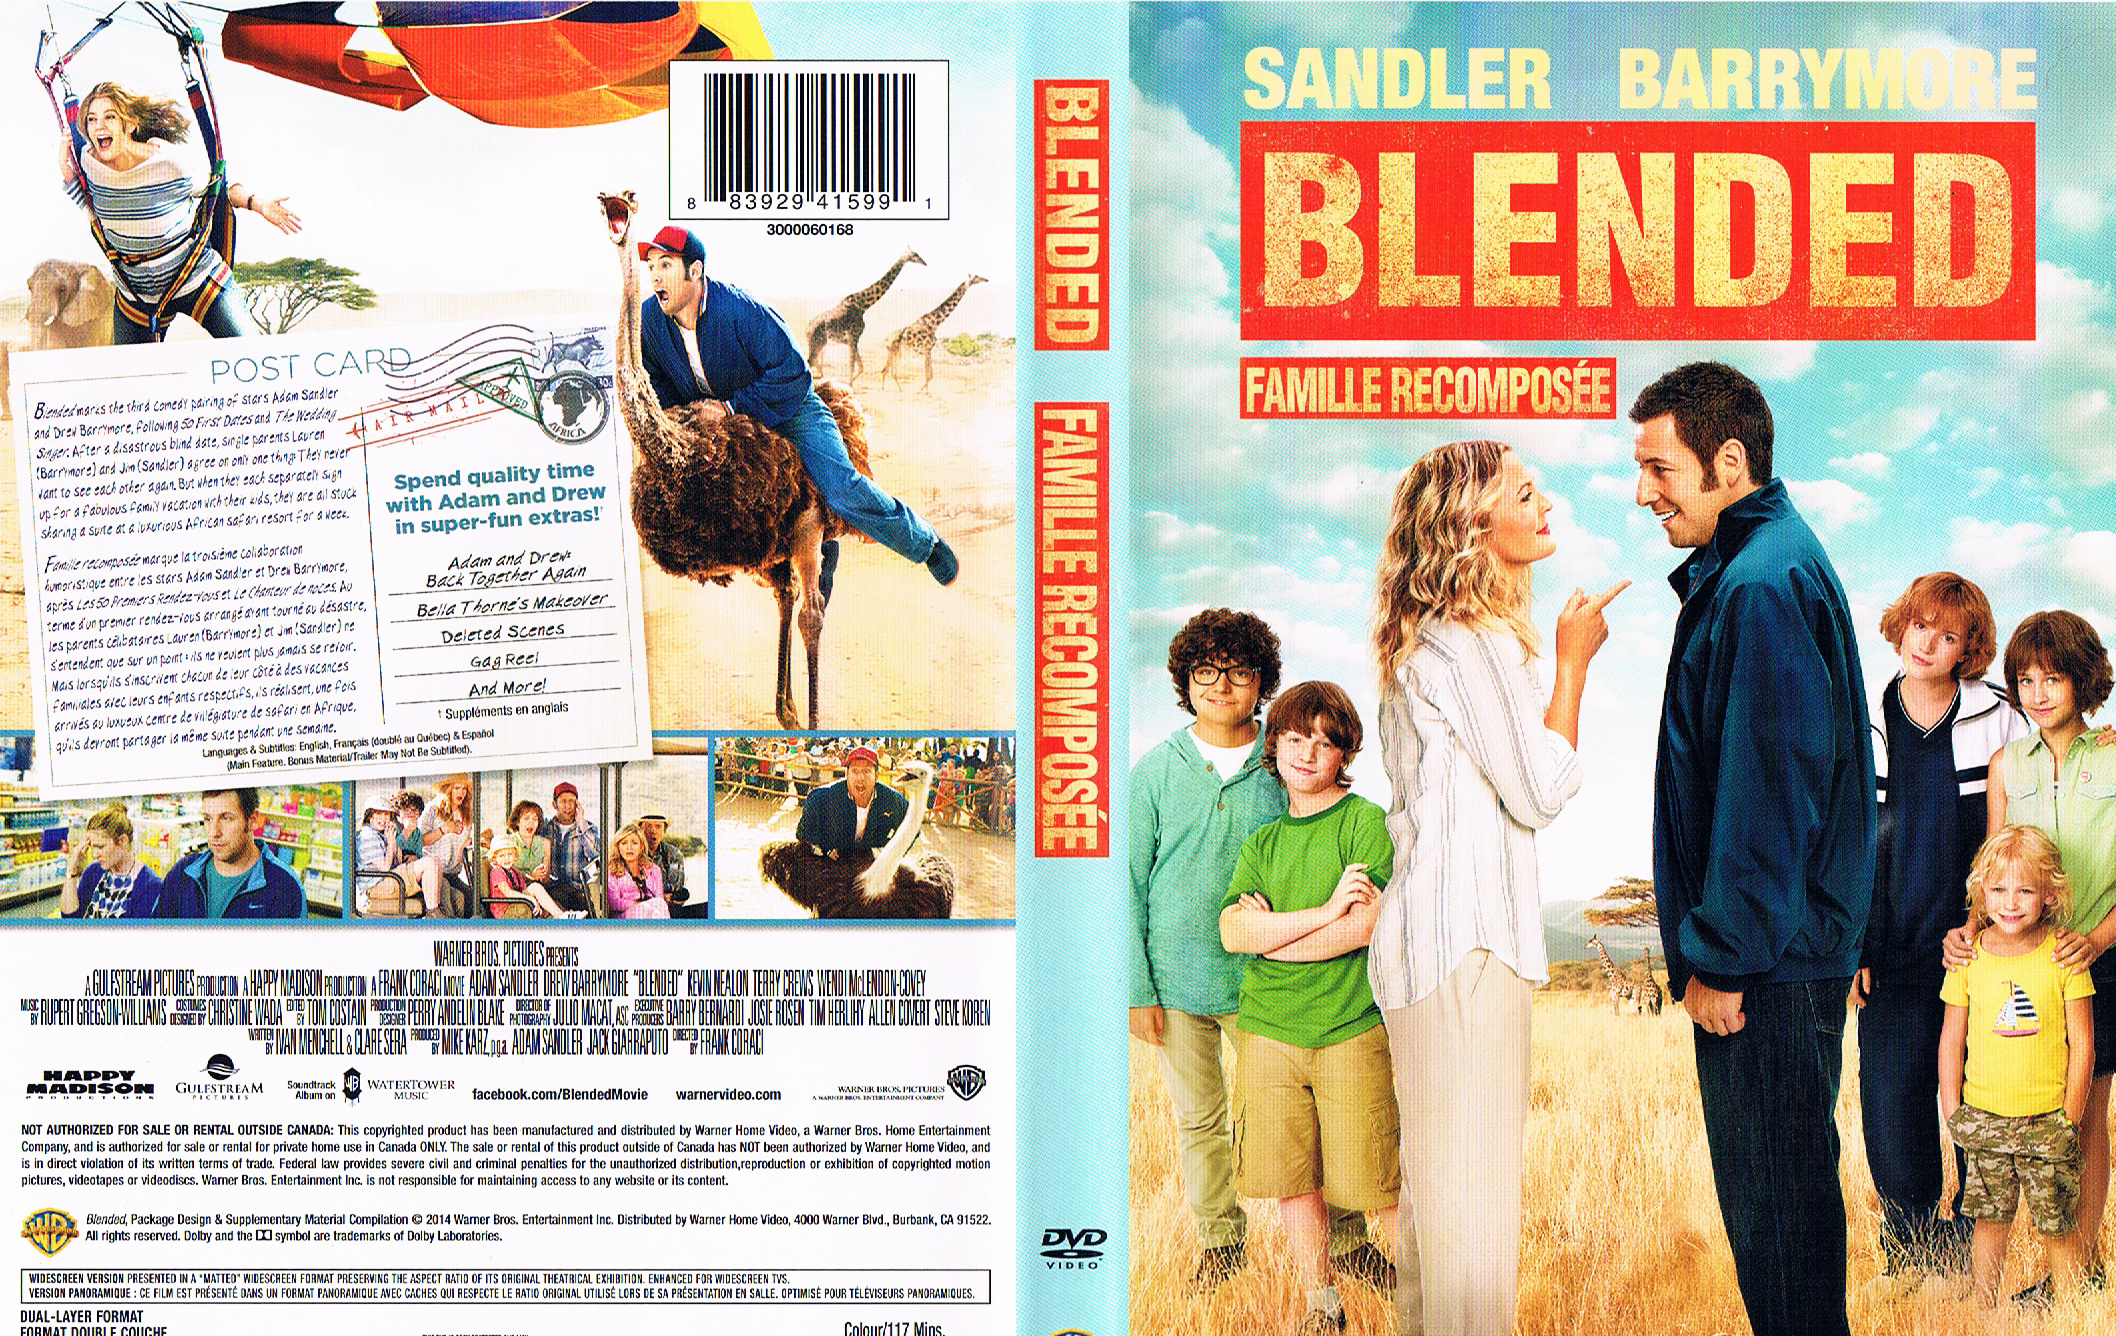 Jaquette DVD Famille recompose - Blended (Canadienne)